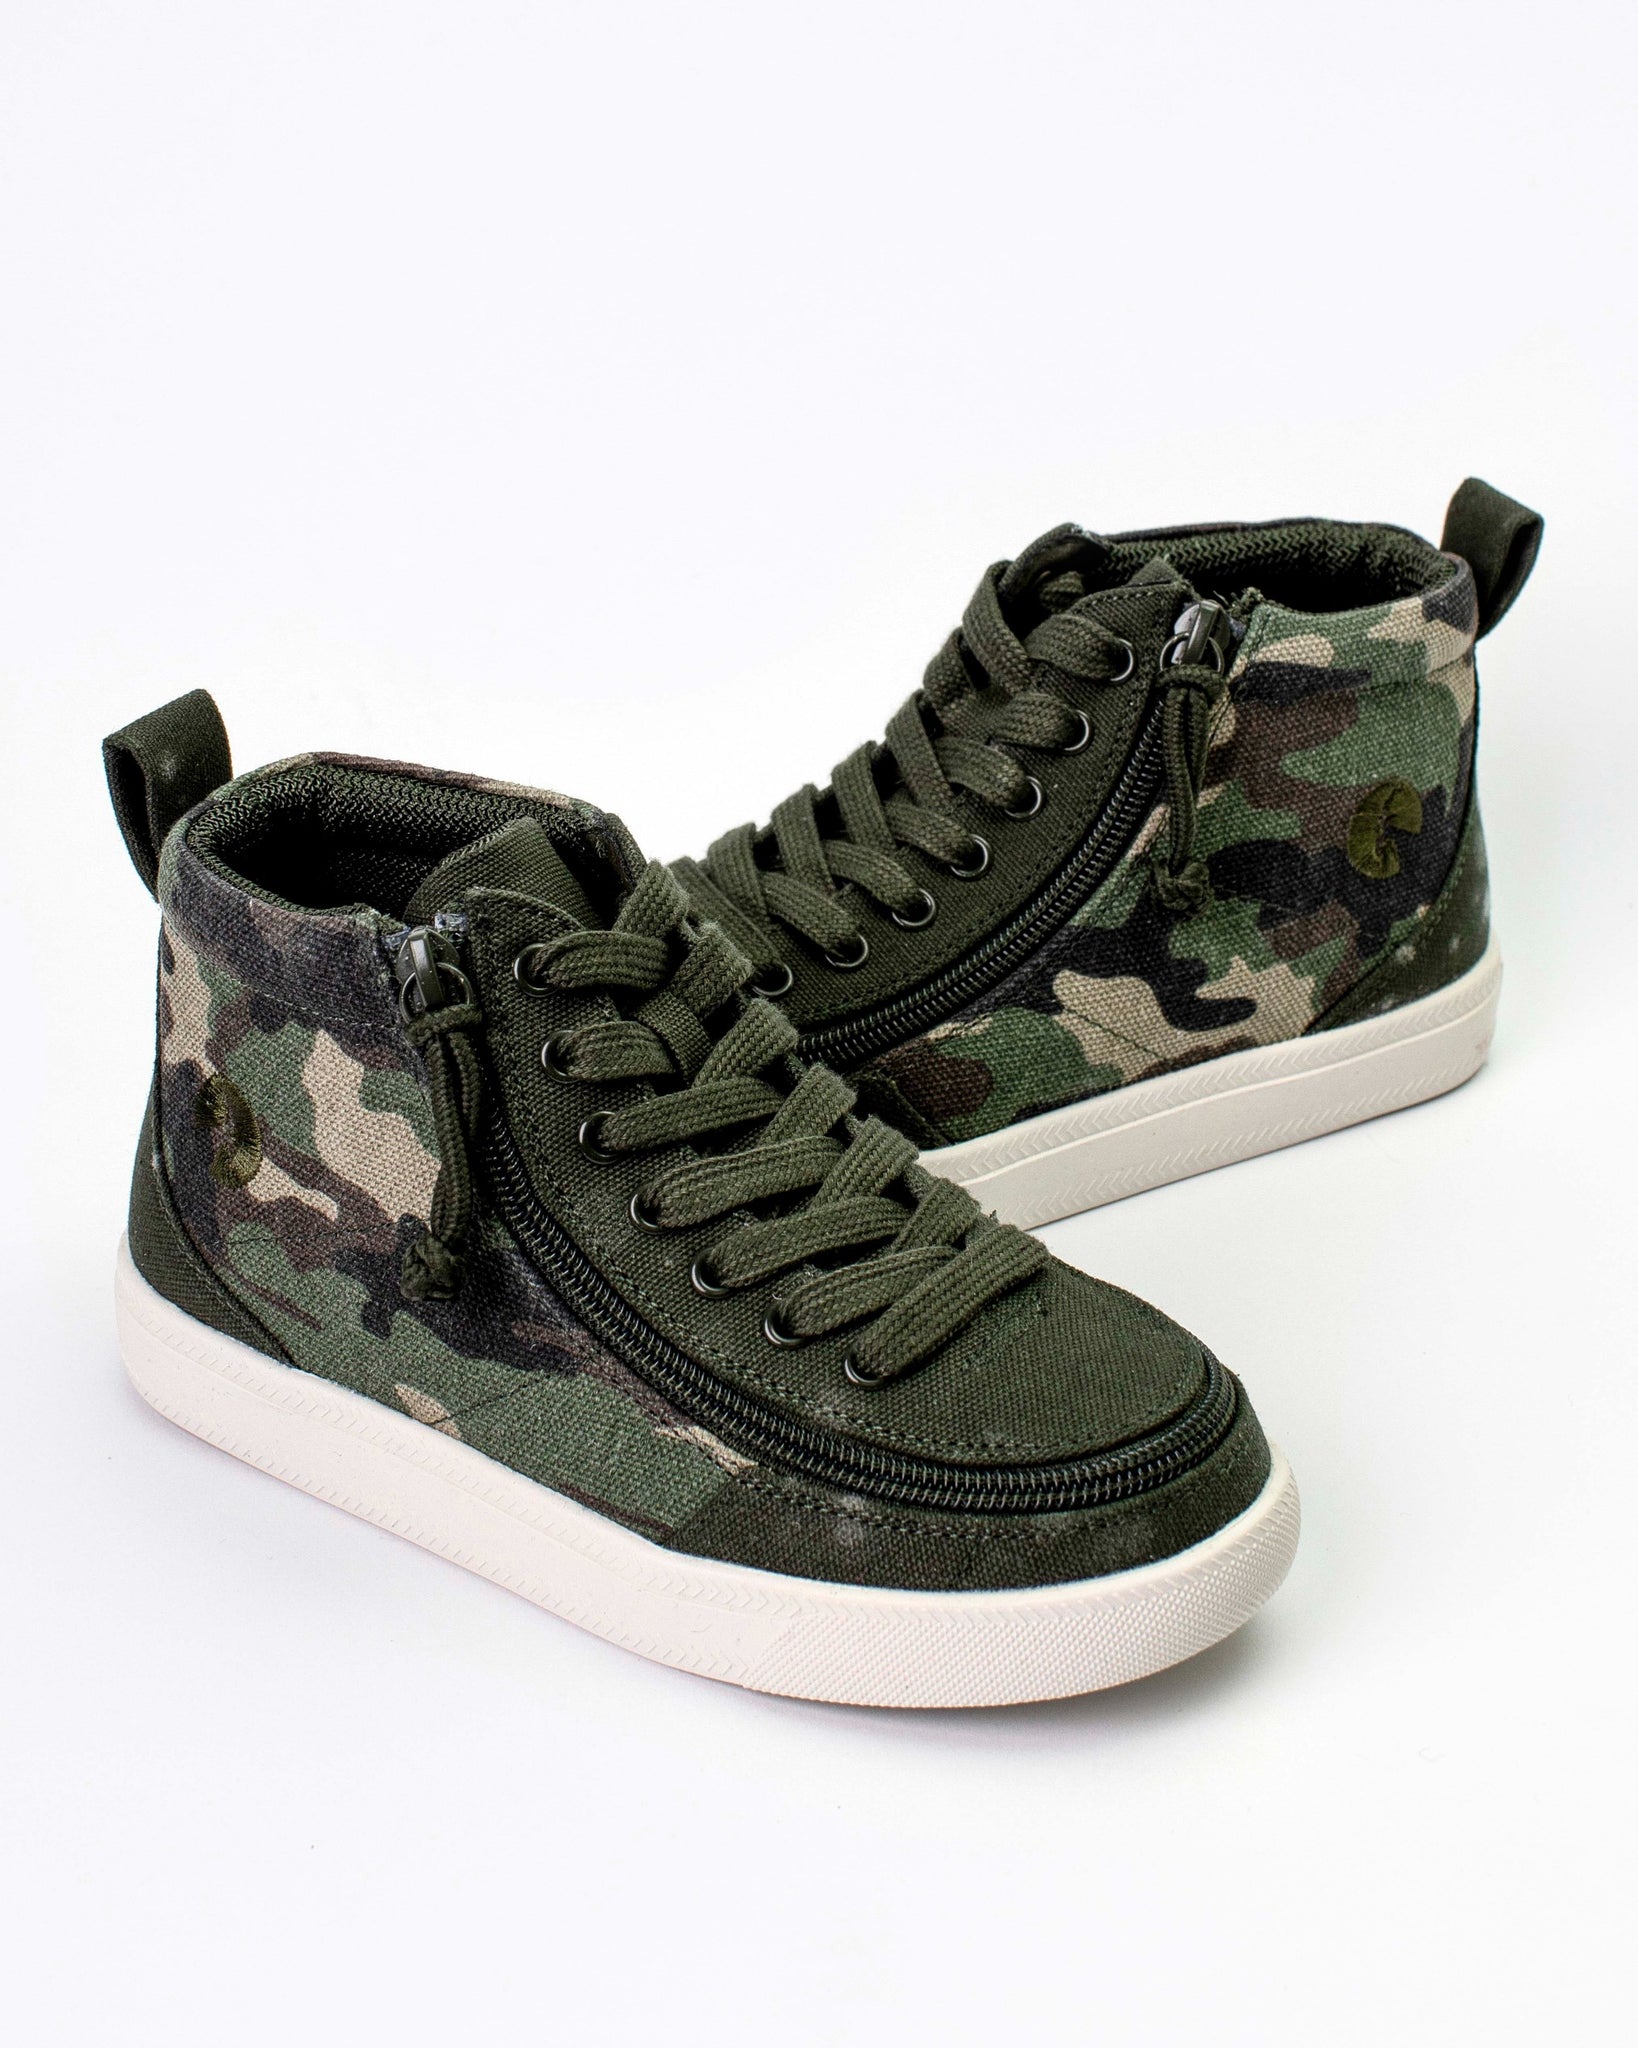 DR High Top (Toddler) - Olive Camo